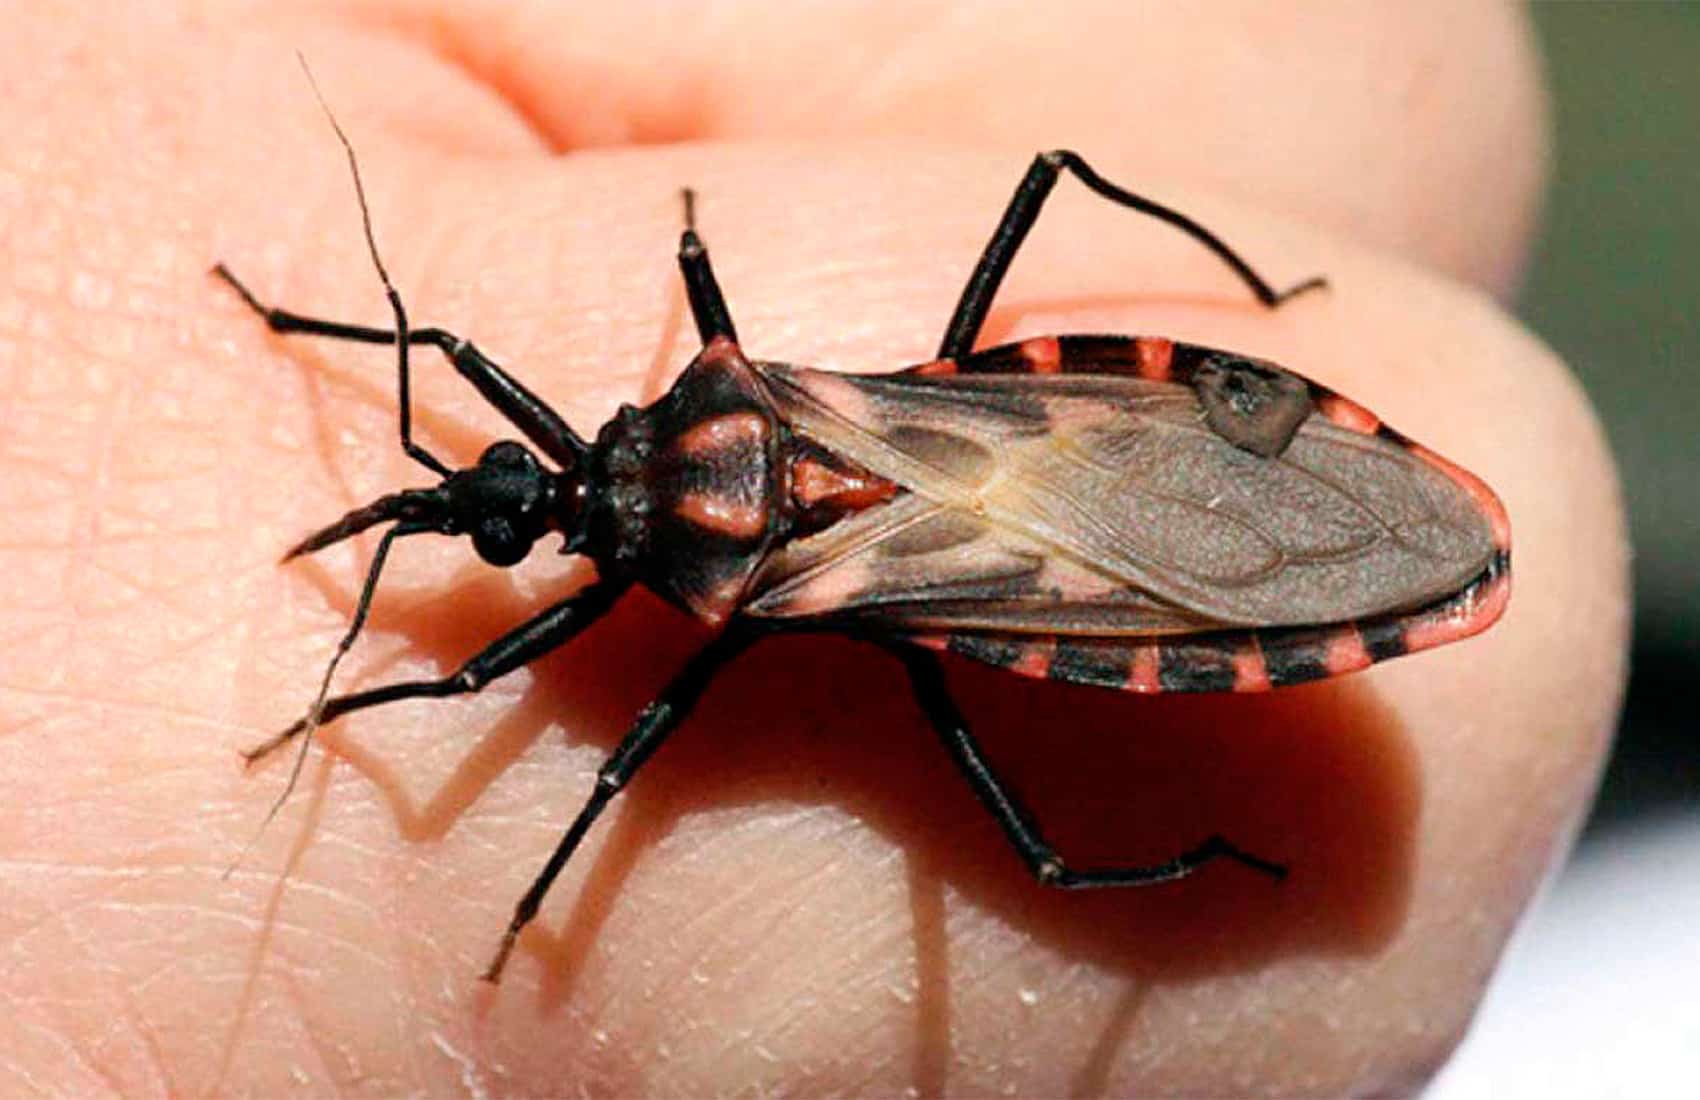 Triatomine or kissing bug